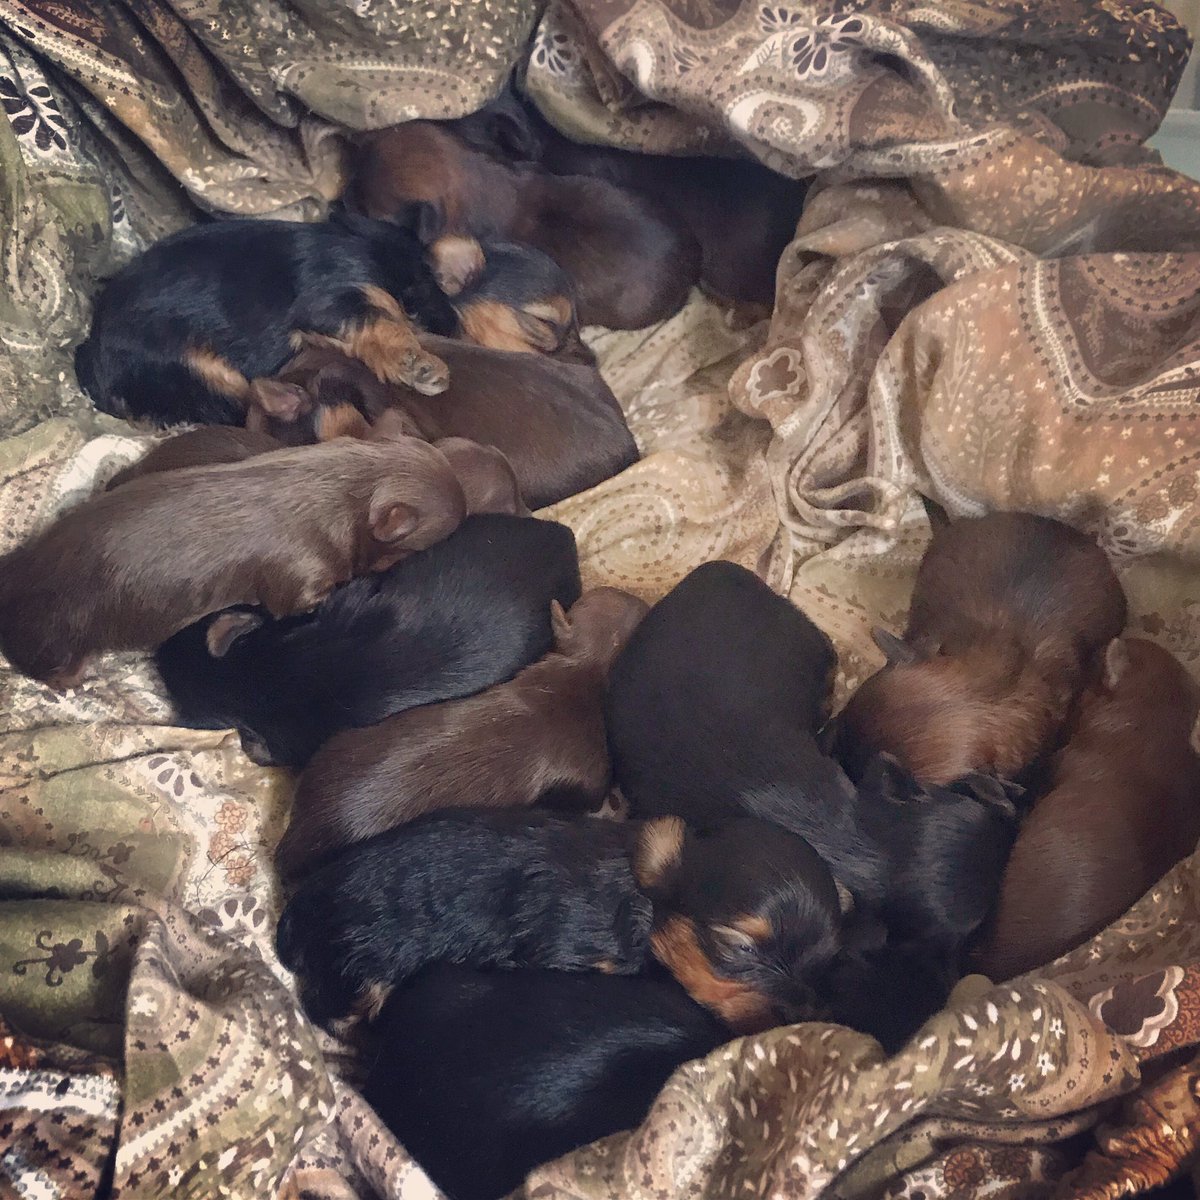 Our newest arrivals Yorkie puppies! Comment or DM for more info #peacepuppies #newarrivals #expectingmothers #yorkiepuppies #yorkshireterrier #yorkiesforsale #teacupyorkies #tinypuppies #newmom #yorkieaddiction